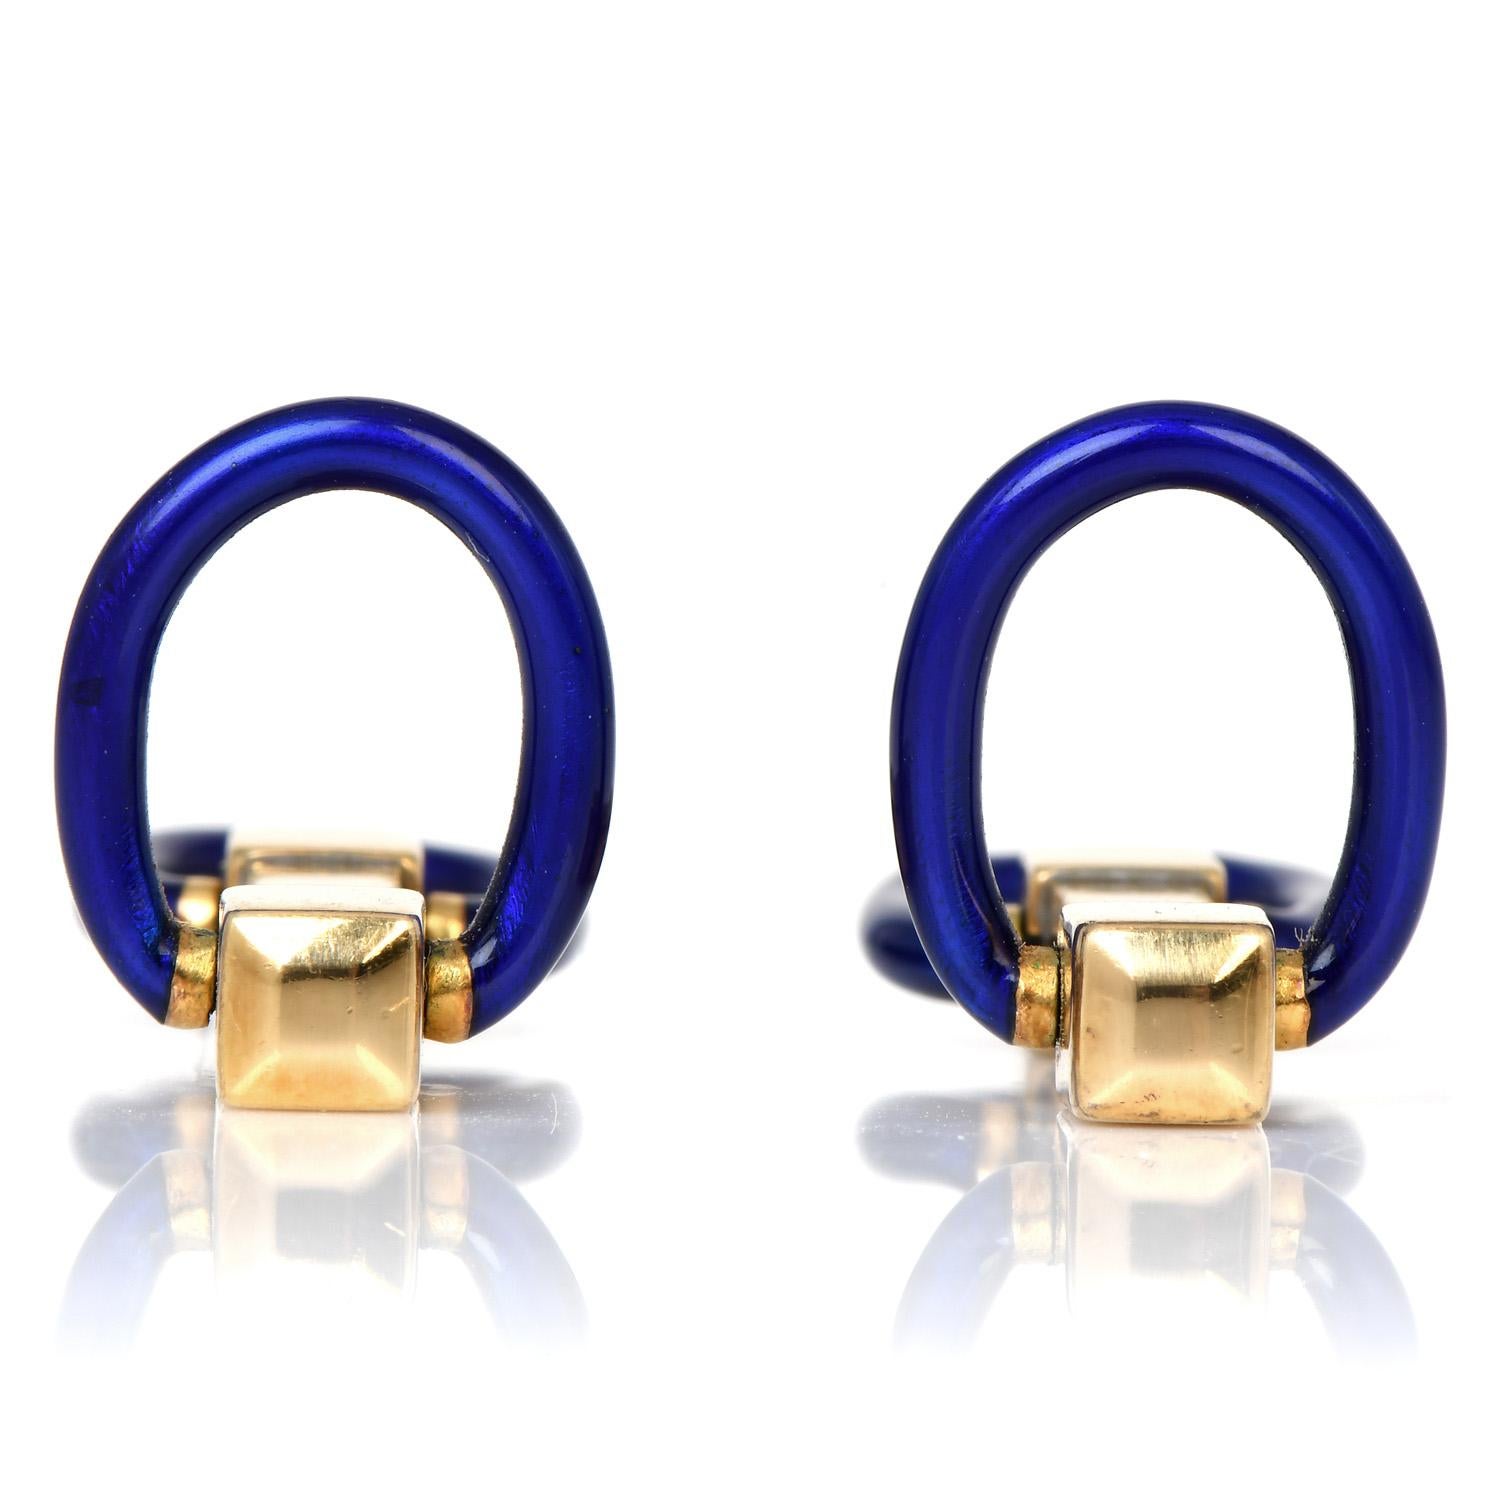 A Touch of color and elegance in these circa 1960s cufflinks. 

It is decorated by Four Oval designs, covered in a royal blue enamel.

The ovals are displayed on either side of the cufflinks and move to lock the pieces in place.

 Weight: 10.0